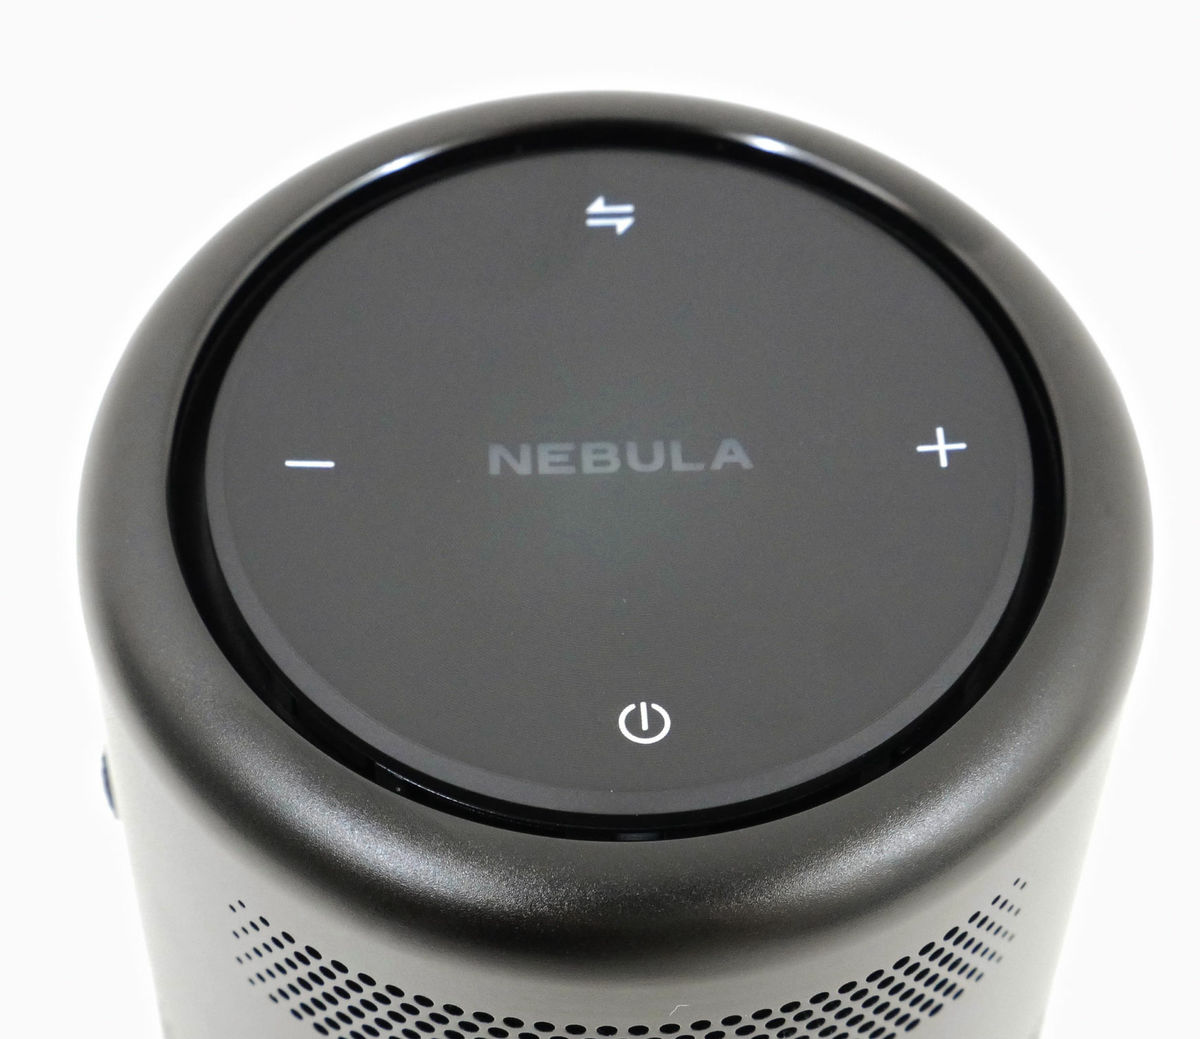 I tried using Anker's mobile projector 'Nebula Capsule Pro' that 